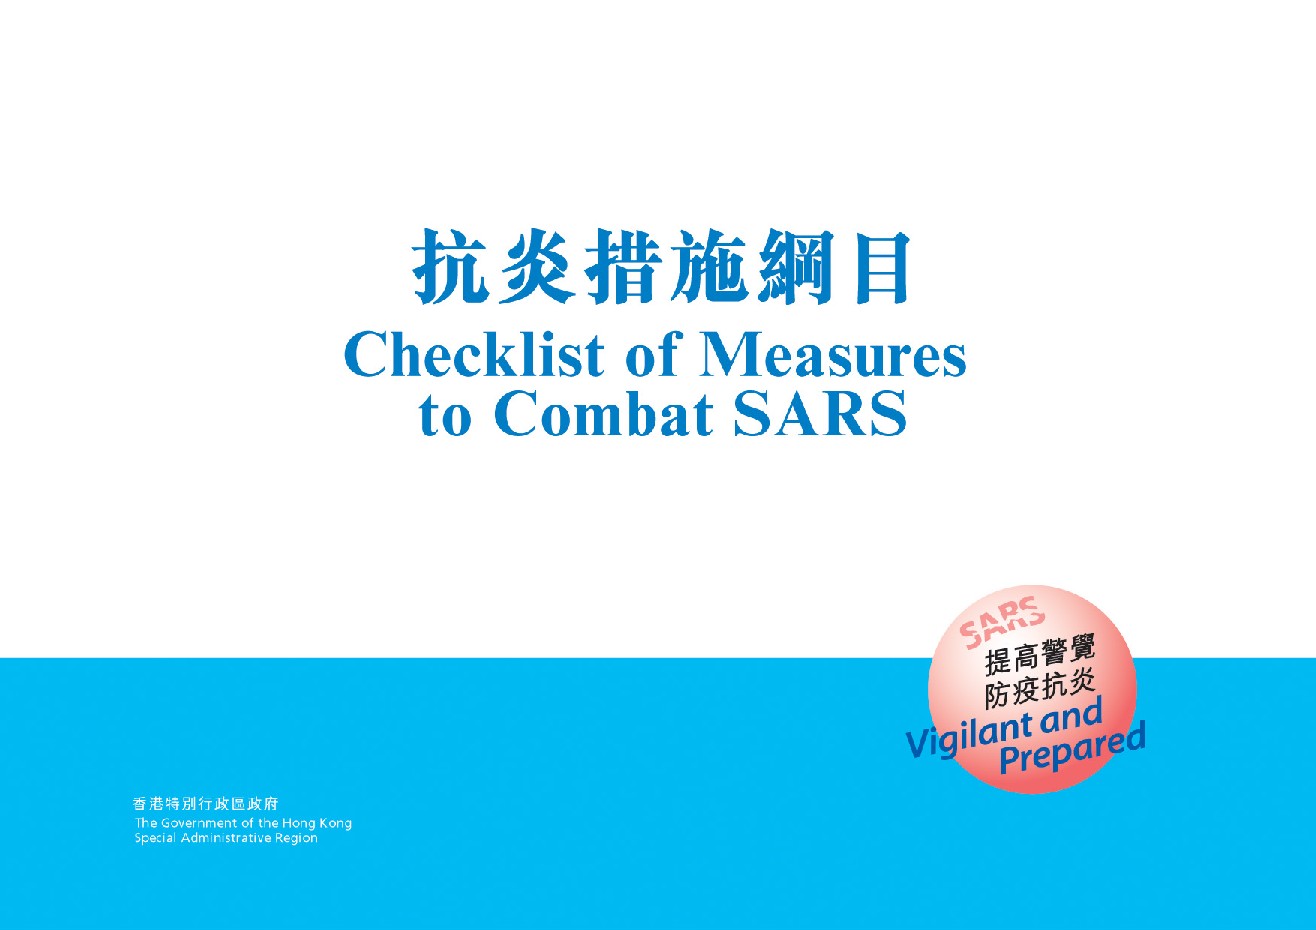 Checklist of Measures to Combat SARS